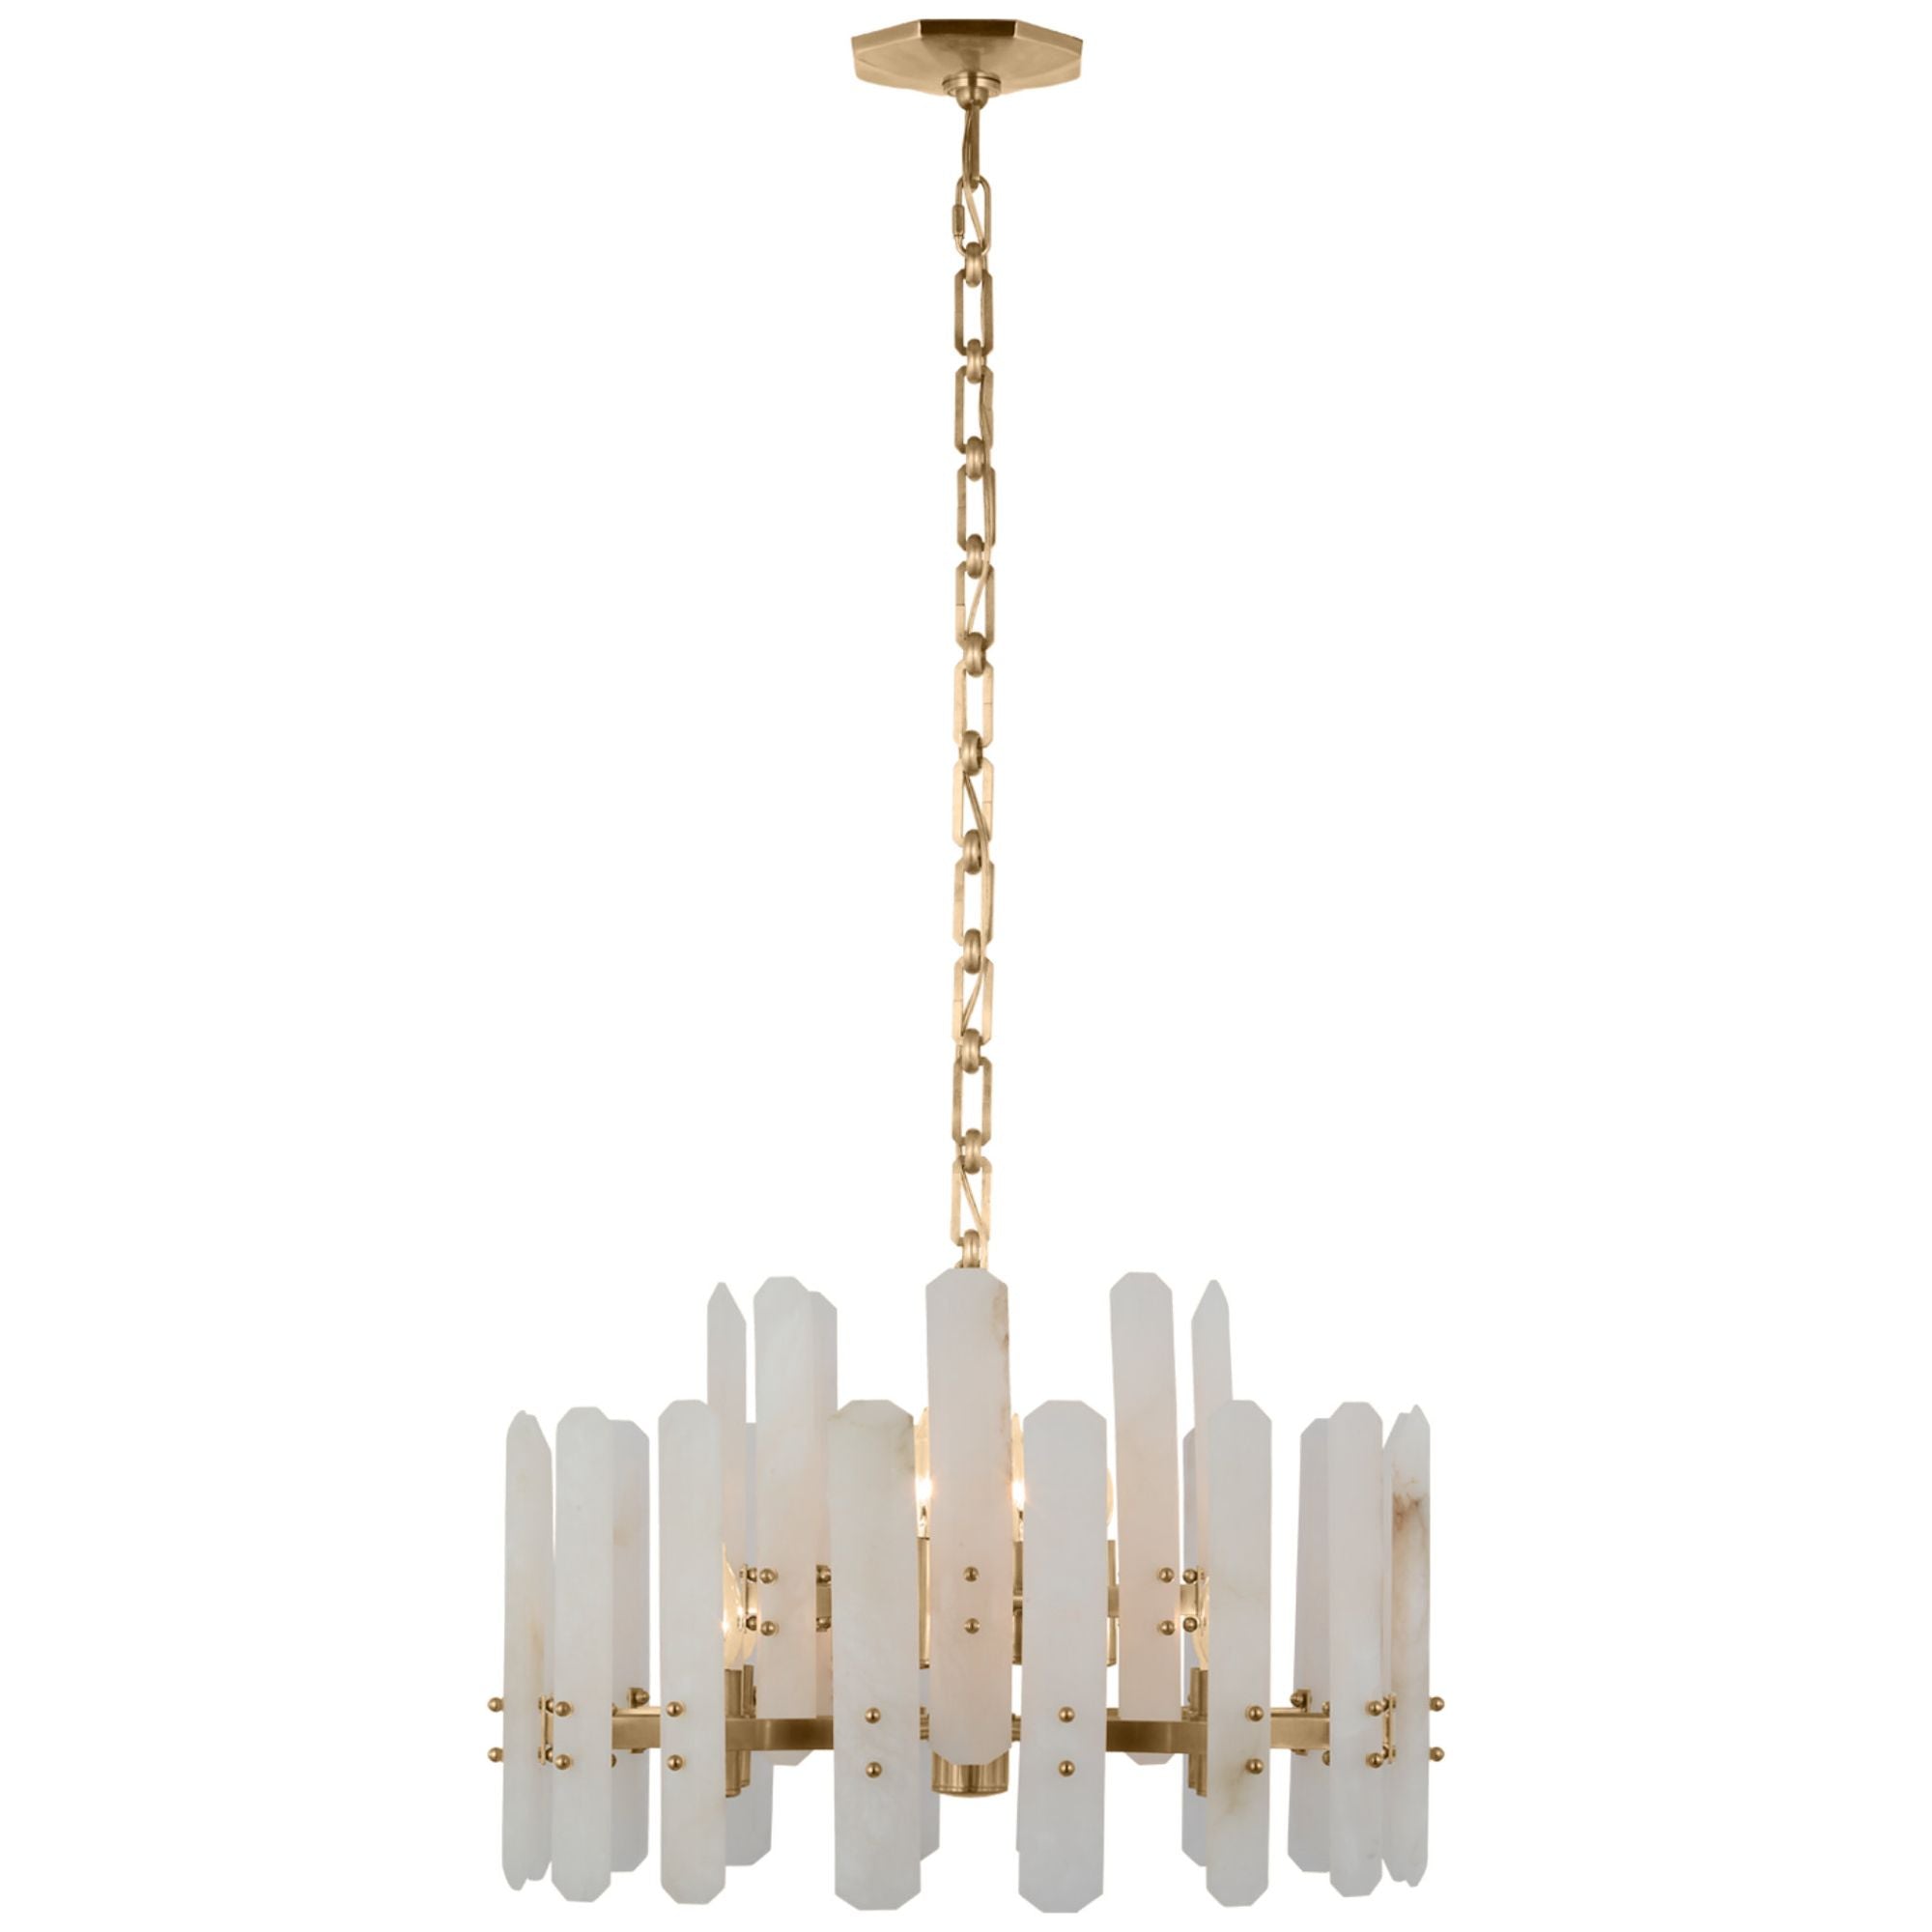 AERIN Bonnington Small Chandelier in Hand-Rubbed Antique Brass with Alabaster